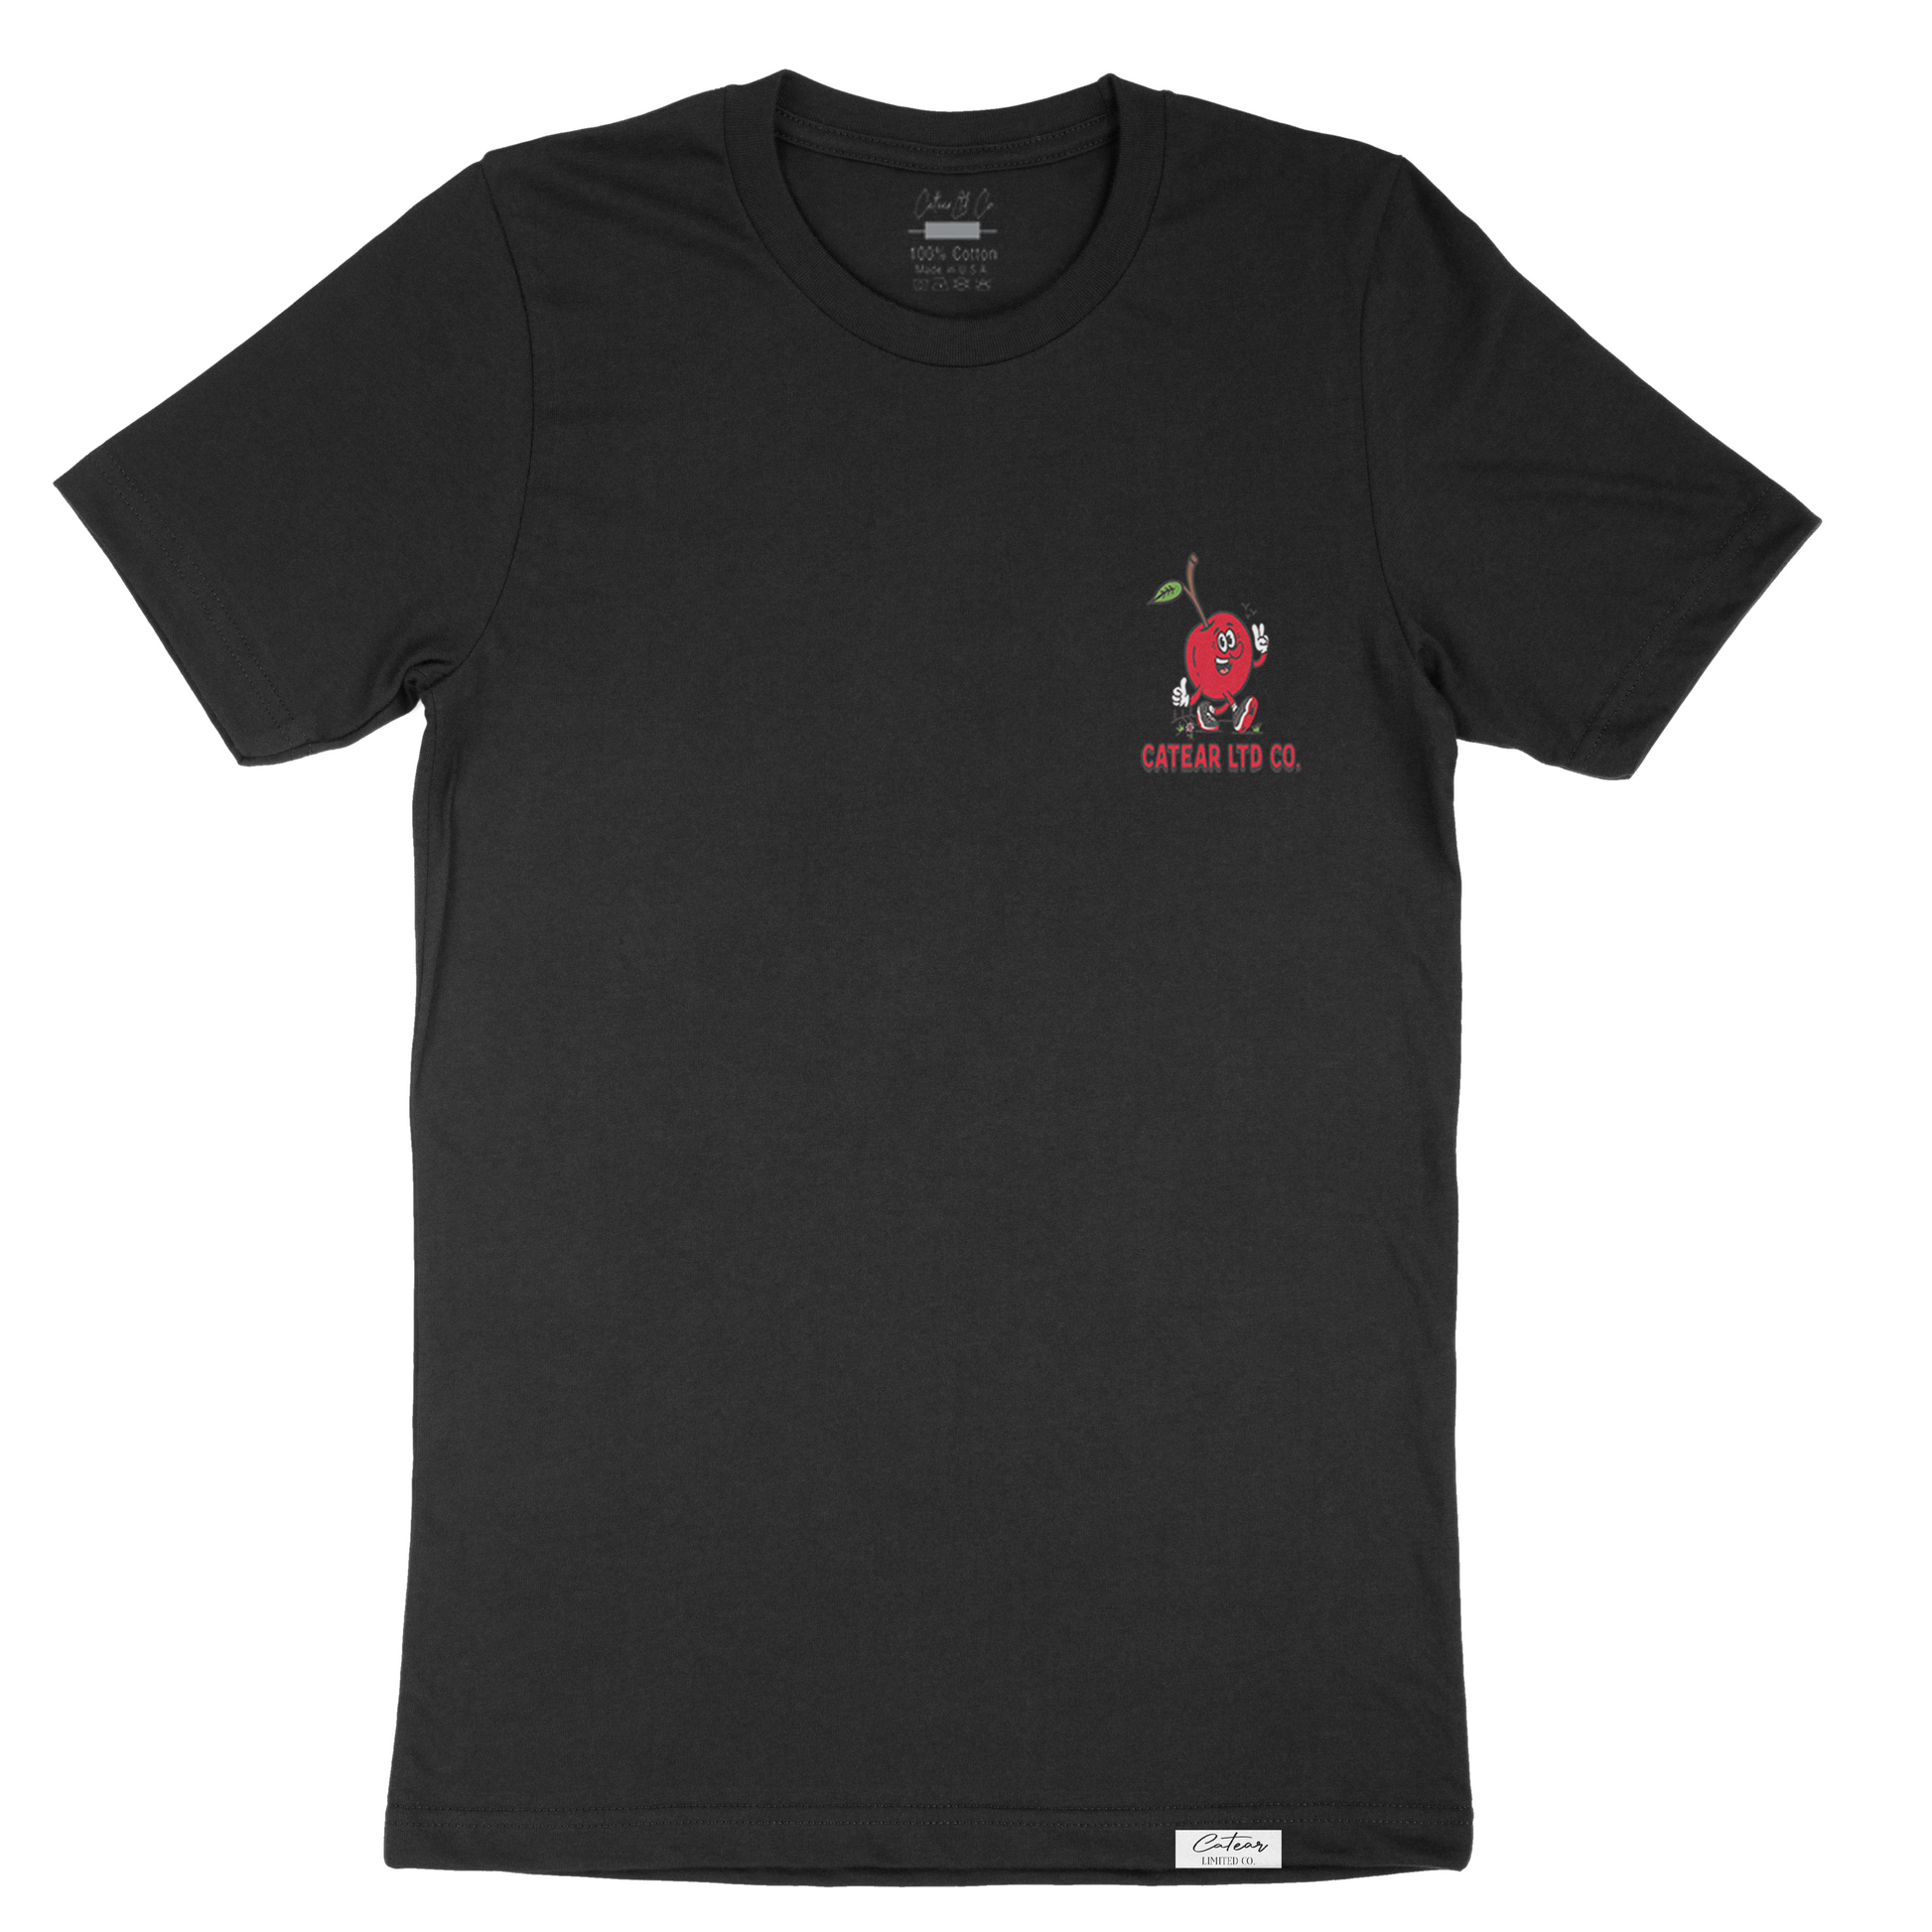 Unisex Black color tee with walking cherry & CATEAR brand name screen printed on the front left chest, woven label on bottom left. Relaxed Fit & great feel.